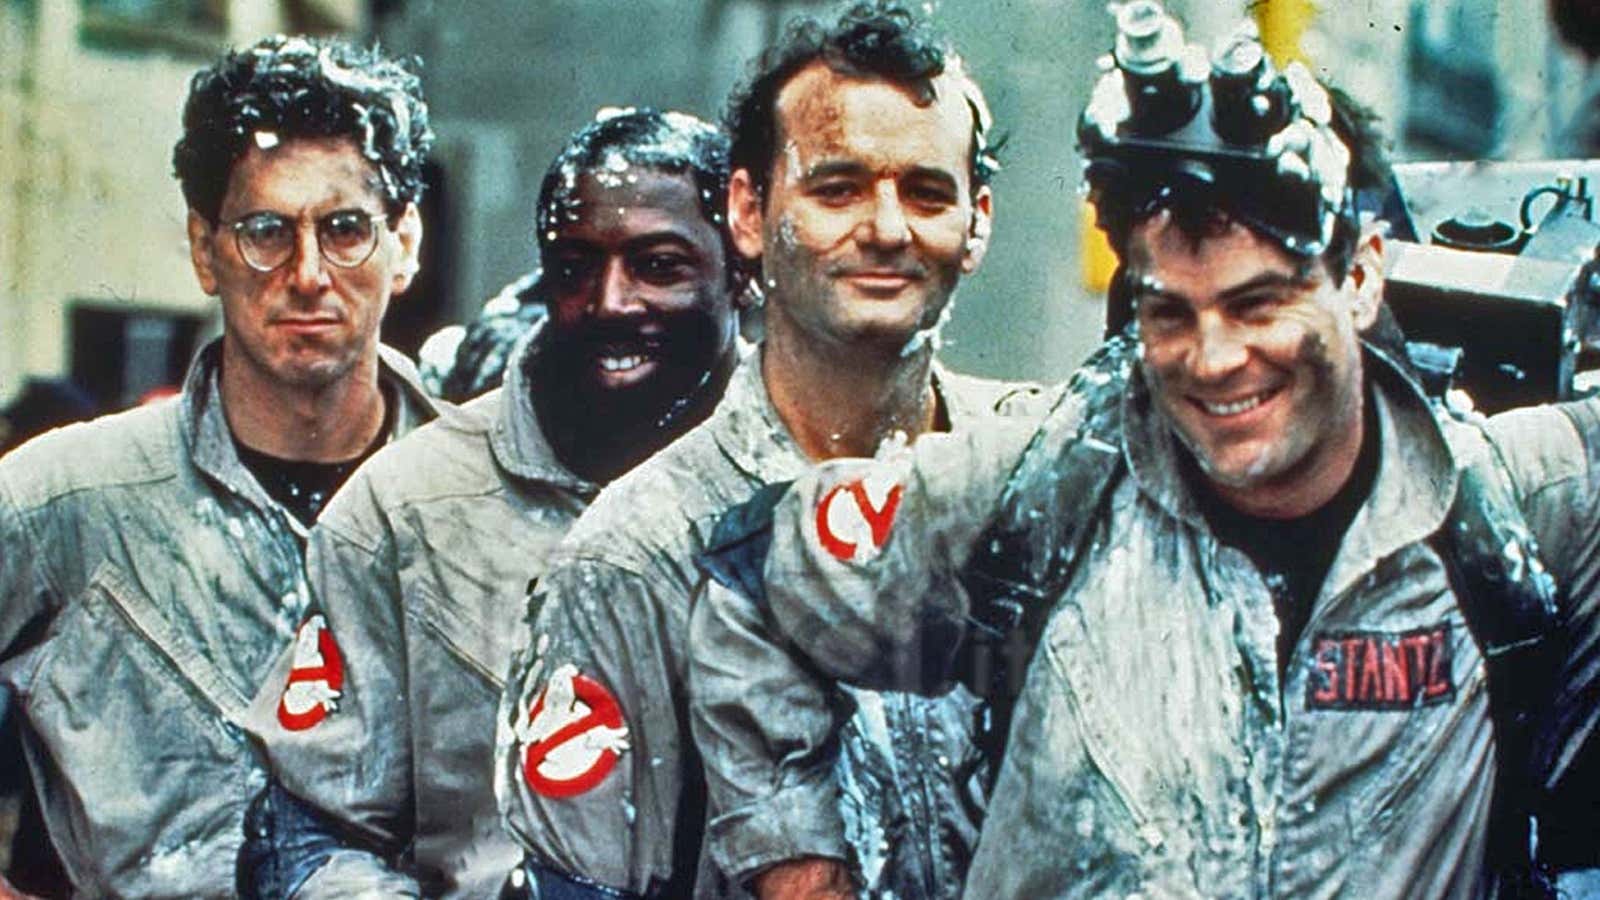 Turning ‘Ghostbusters’ into a franchise reveals a Sony still haunted by bad ideas